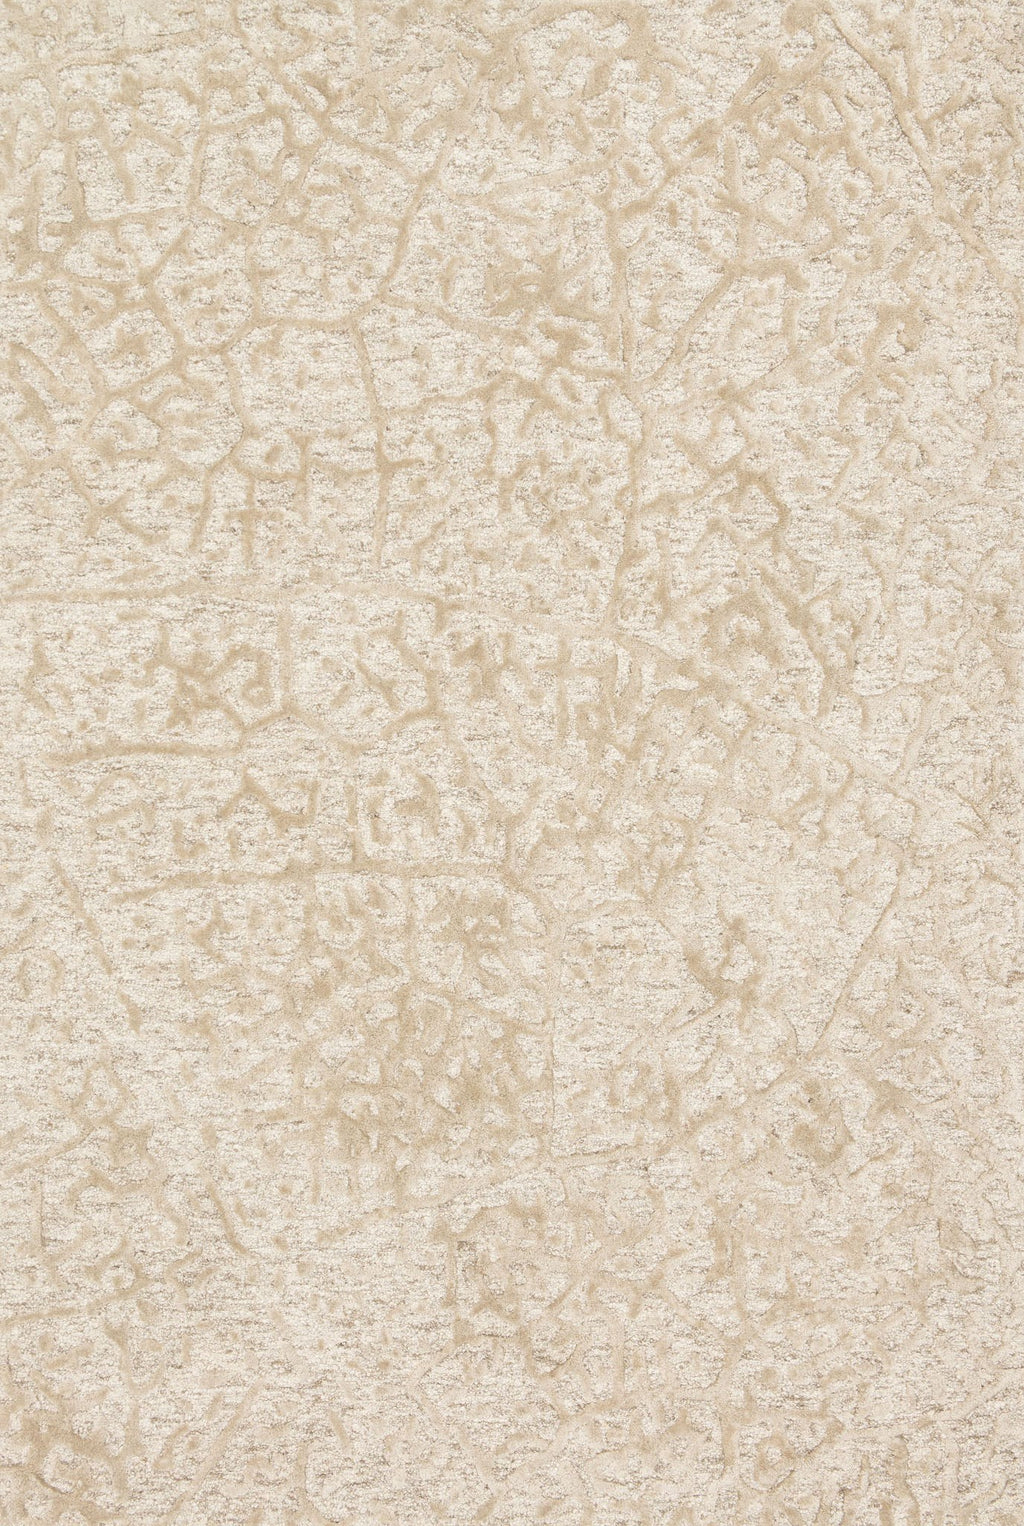 JUNEAU Collection Rug  in  ANT IVORY / BEIGE Beige Small Hand-Tufted Viscose